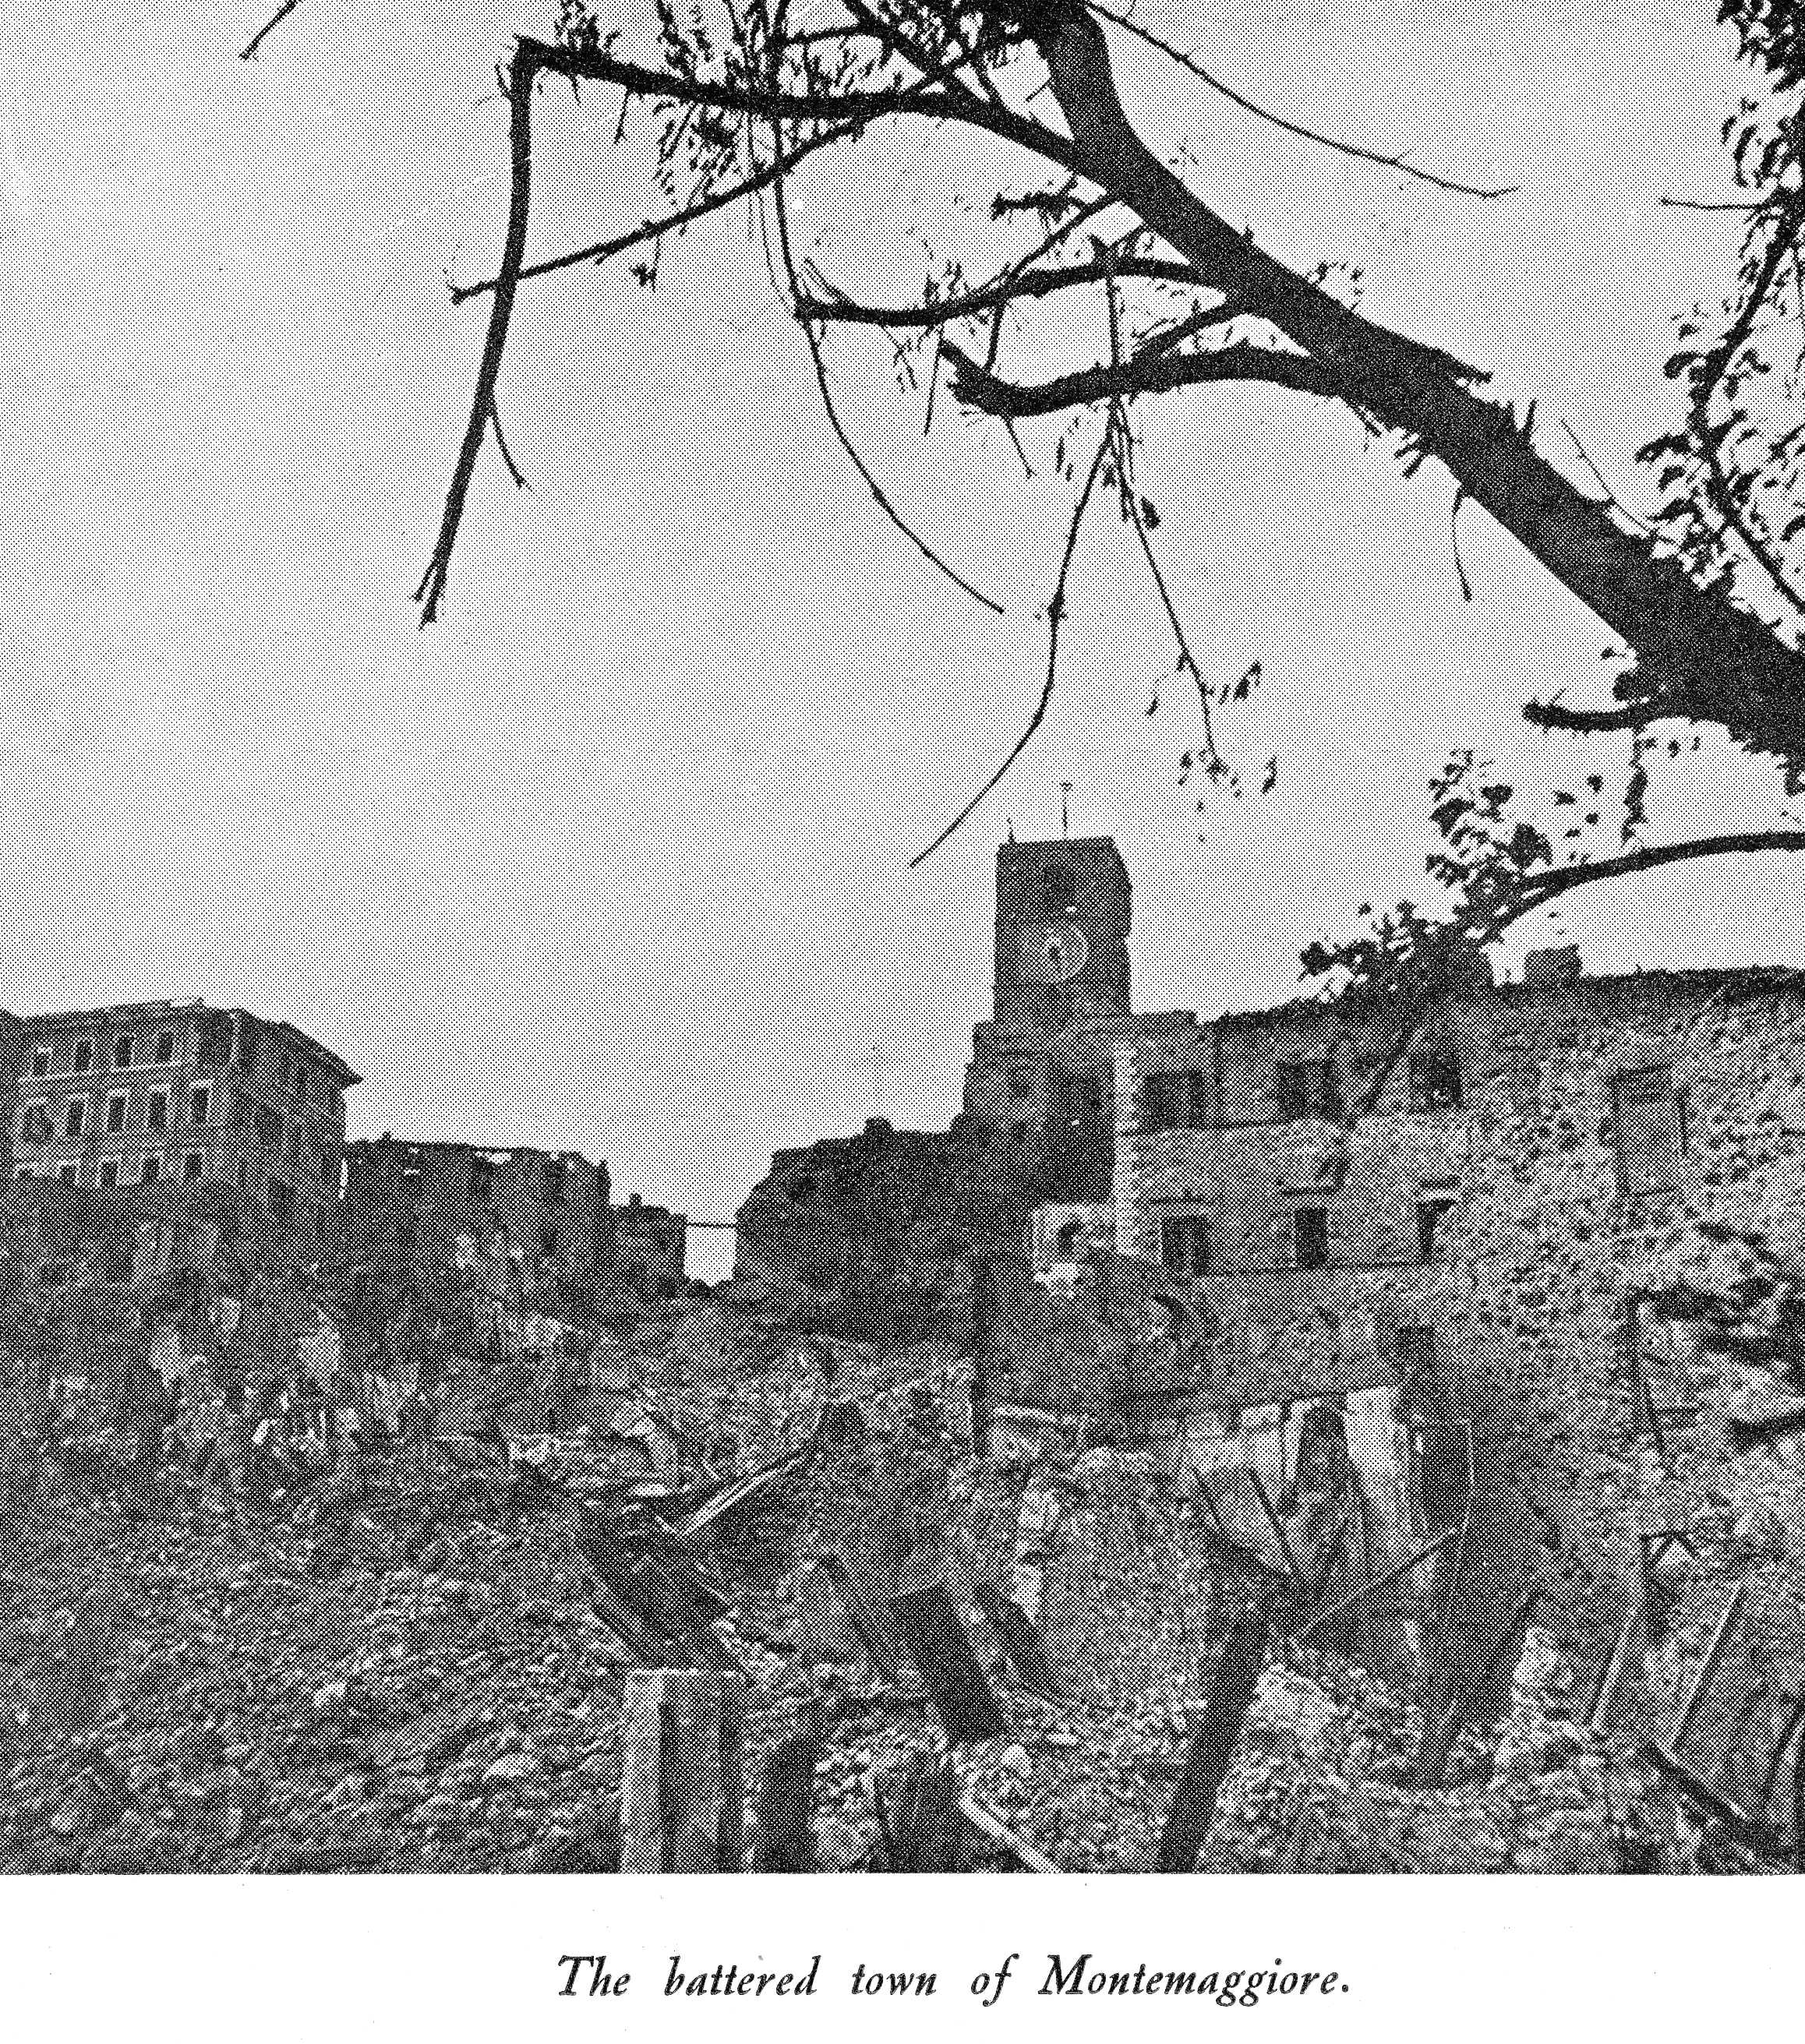 ruins in the battered town of Montemaggiore